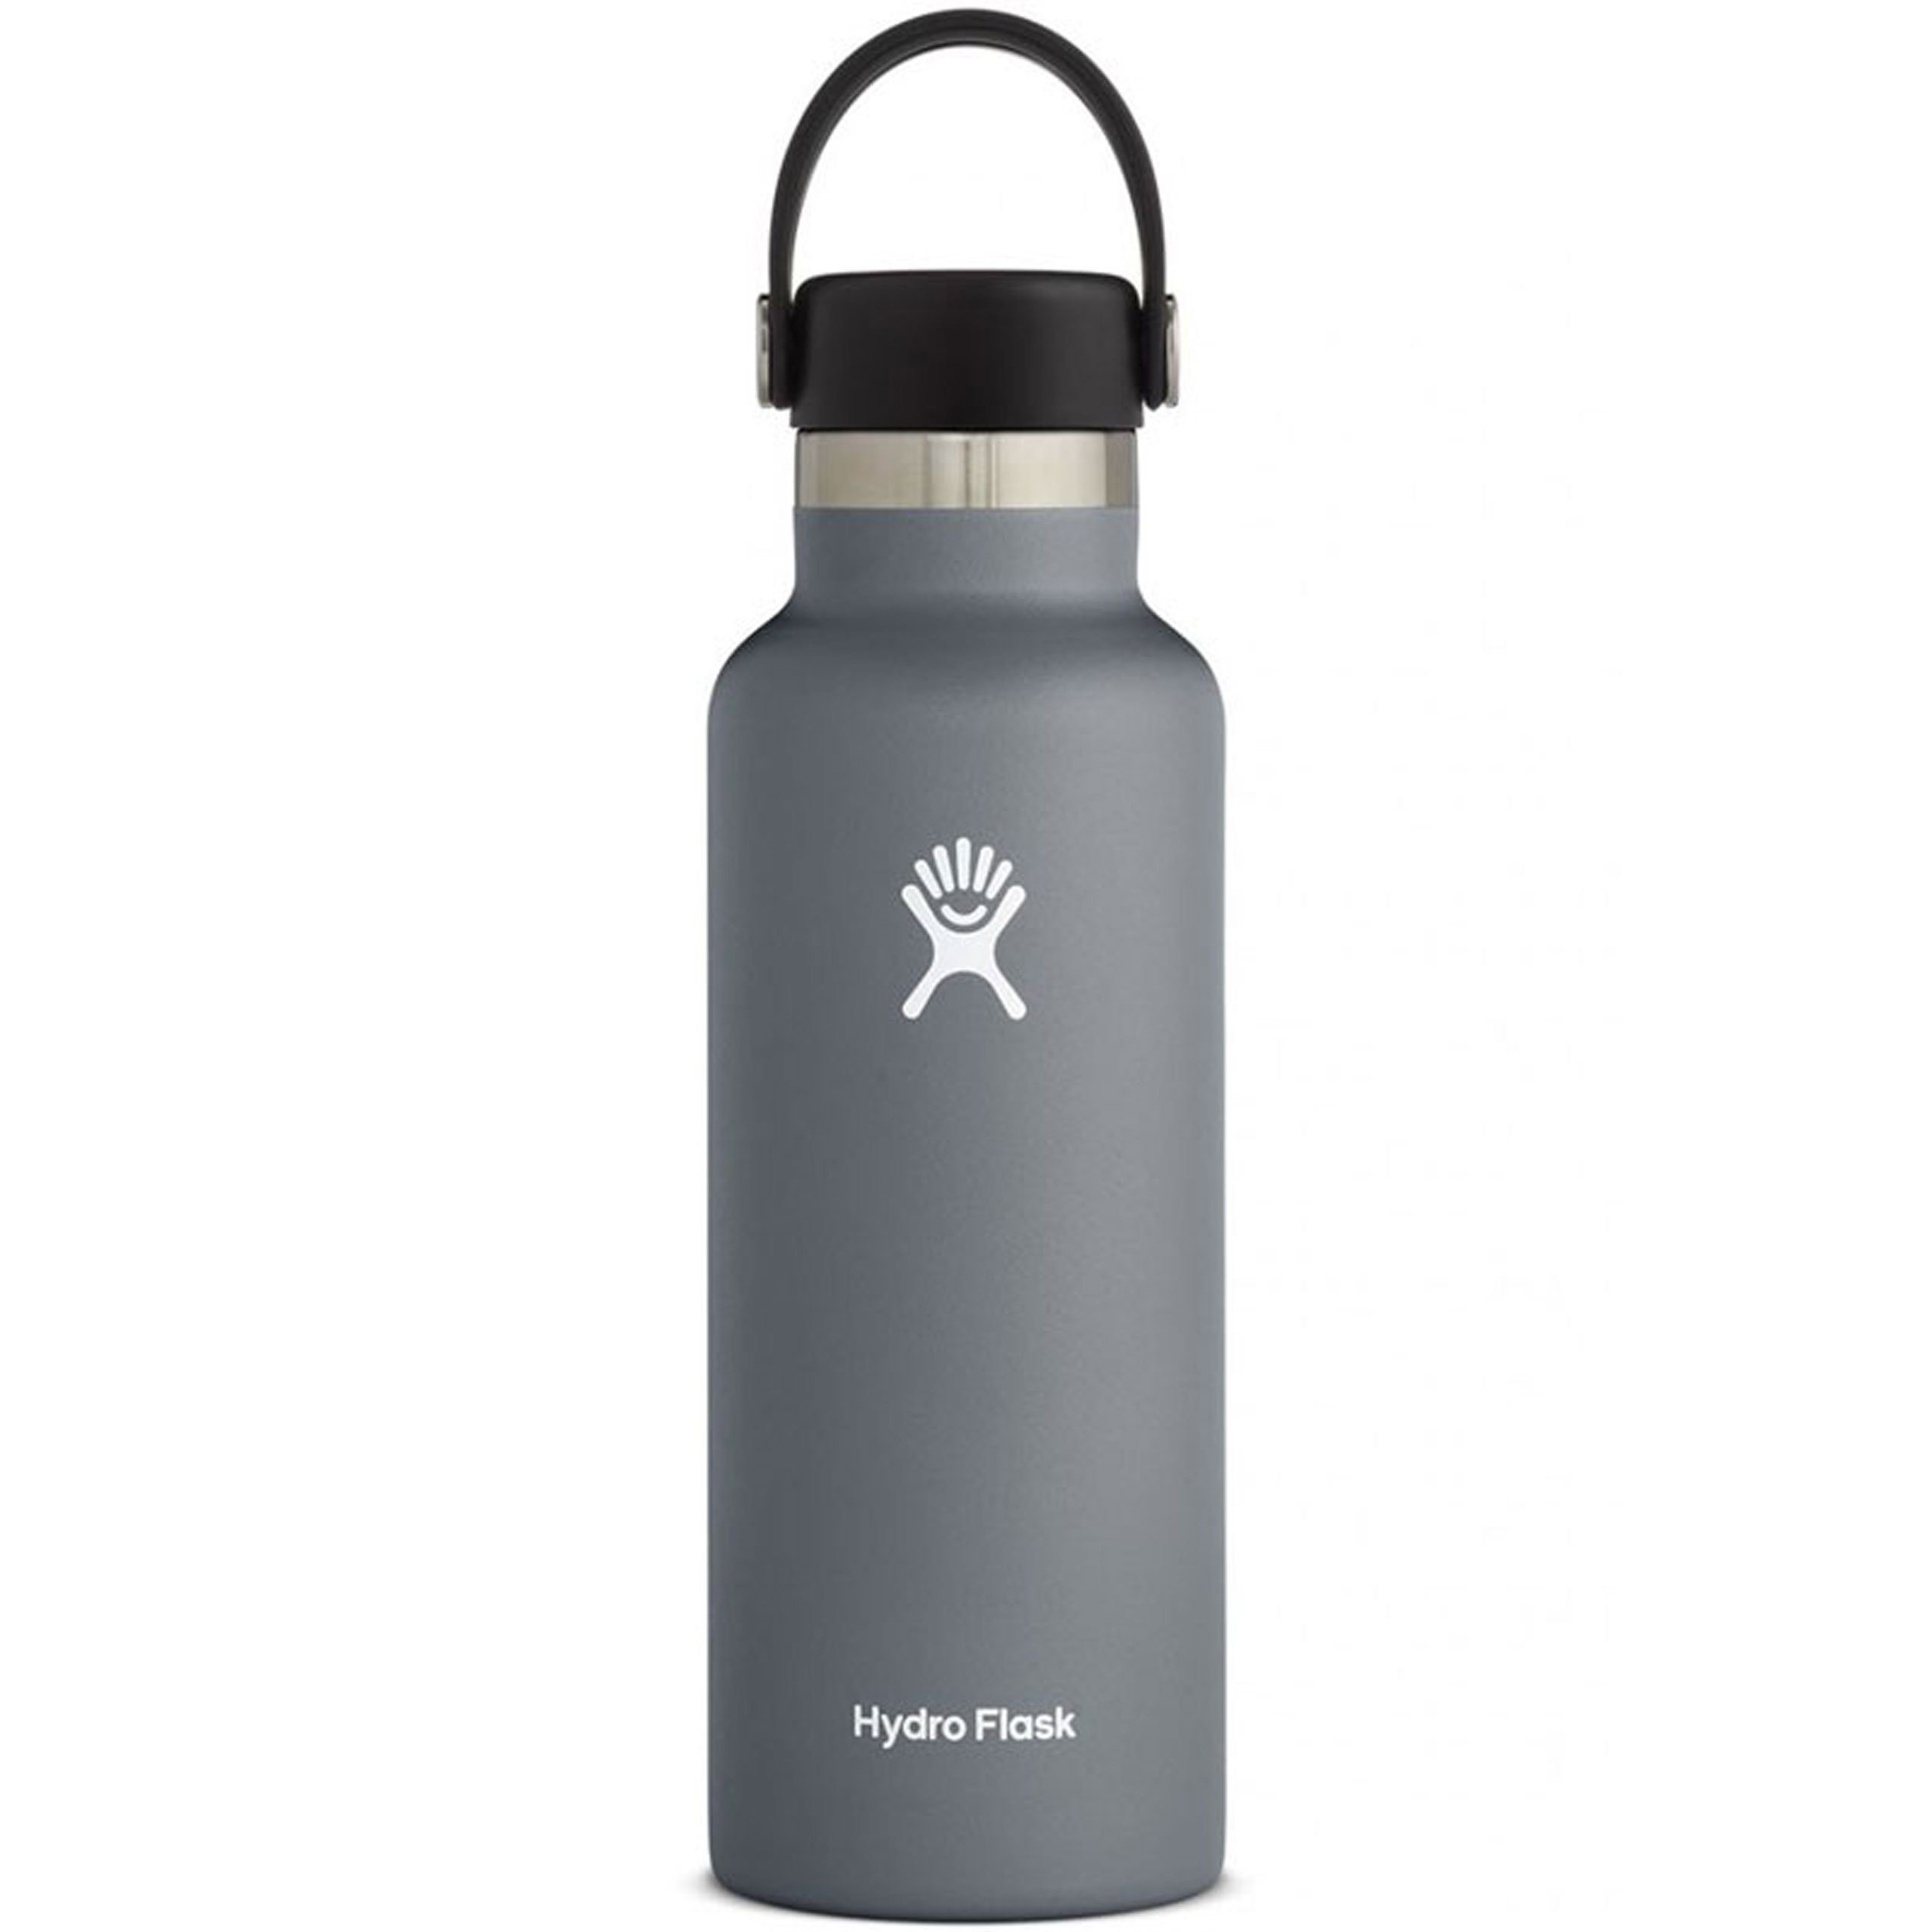 Flask Flask Isolierflasche stone Hydro Hydro Bottle Isolierflasche/Thermoflasche - Mouth Standard